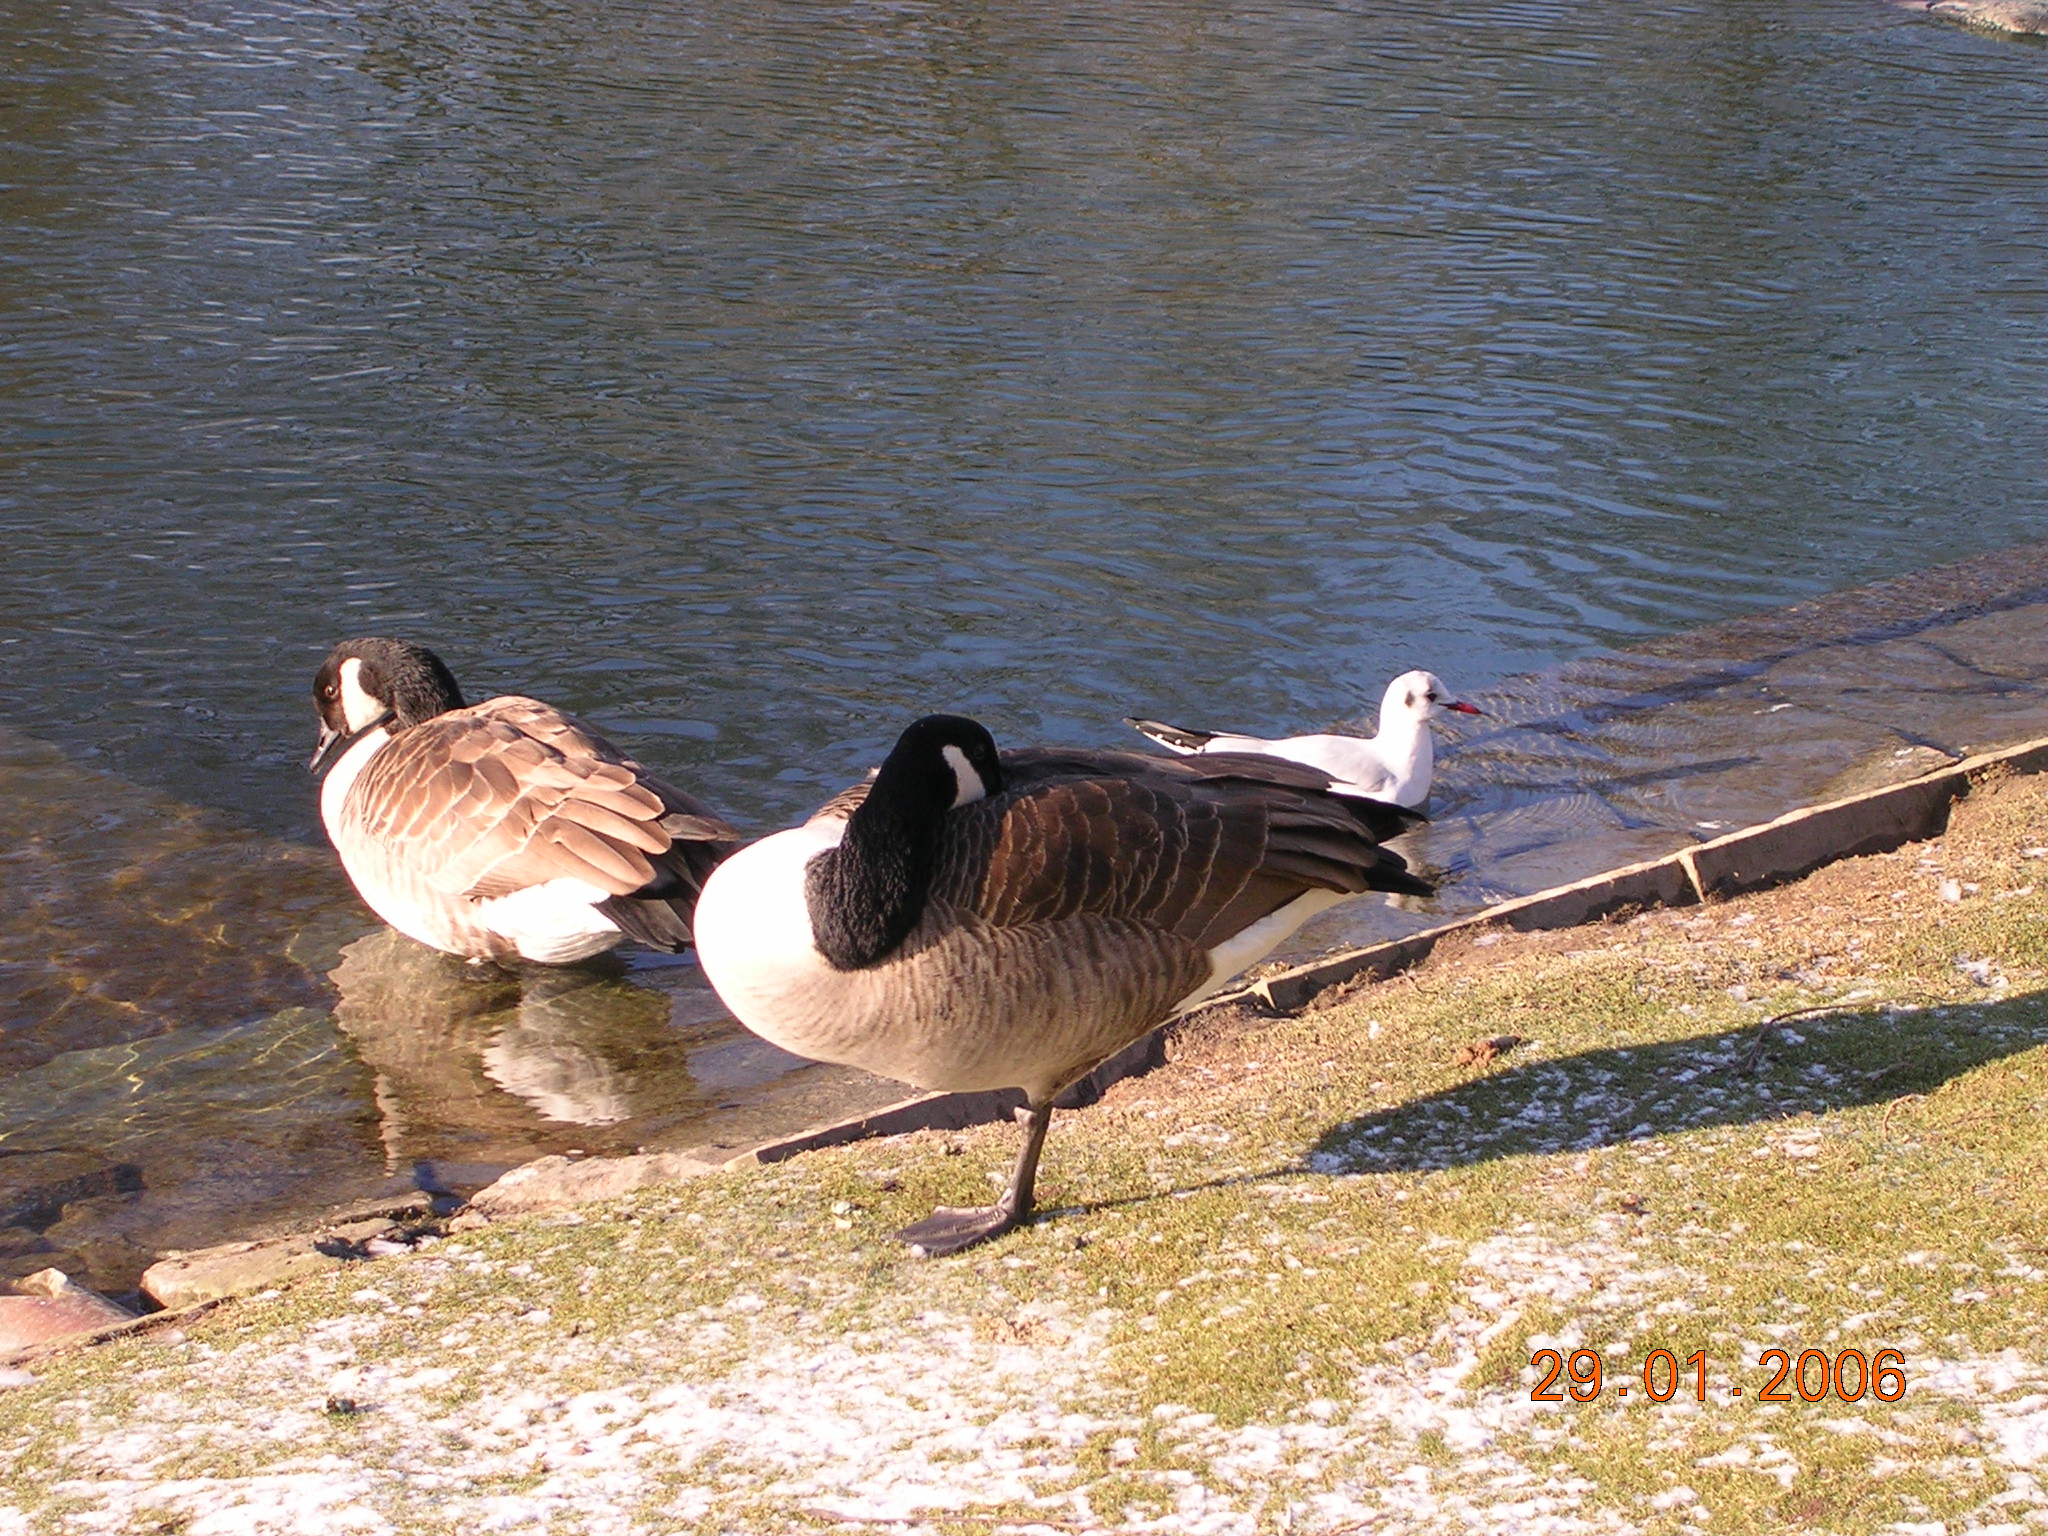 two geese are walking along a small body of water